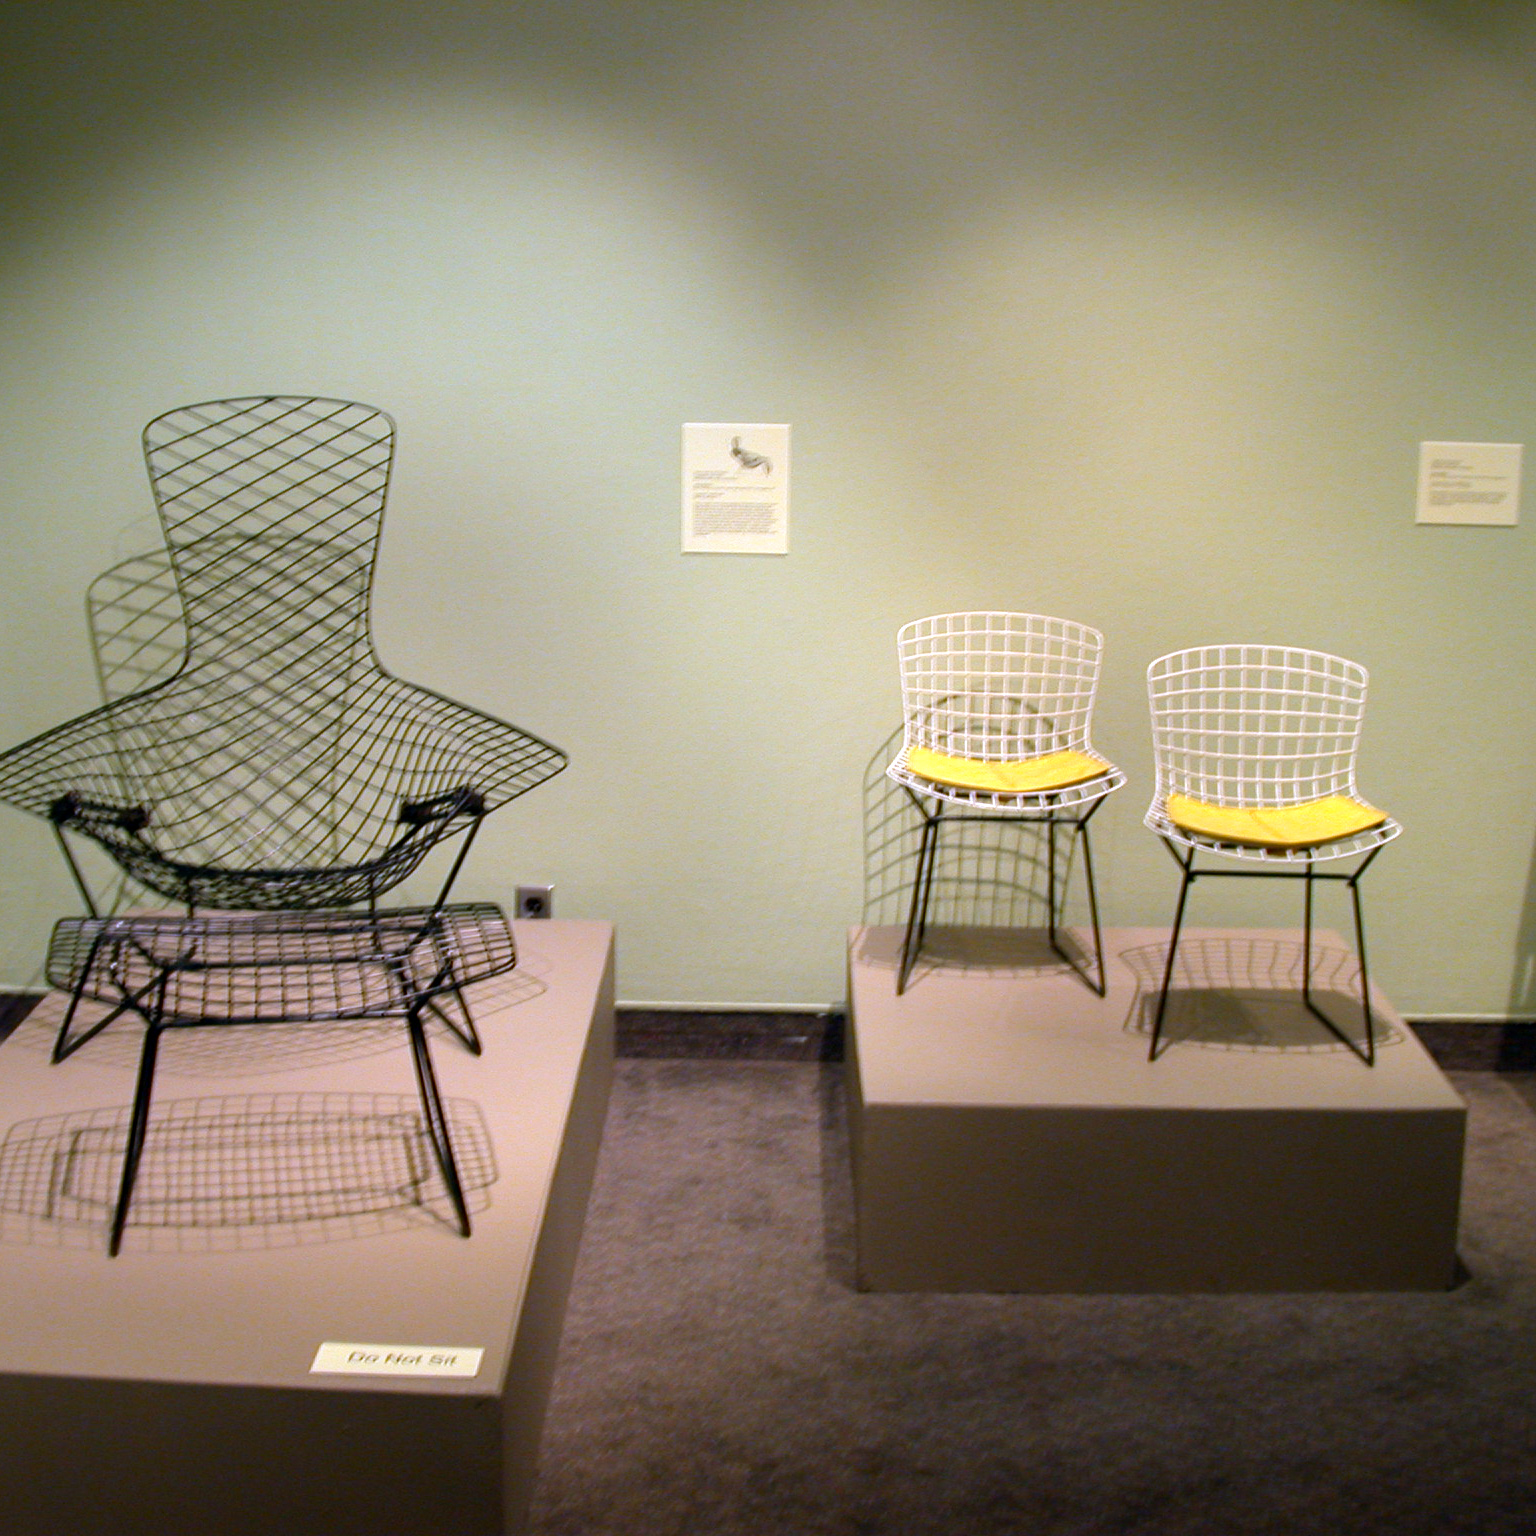 The Chair: 125 Years Of Sitting chairs on display